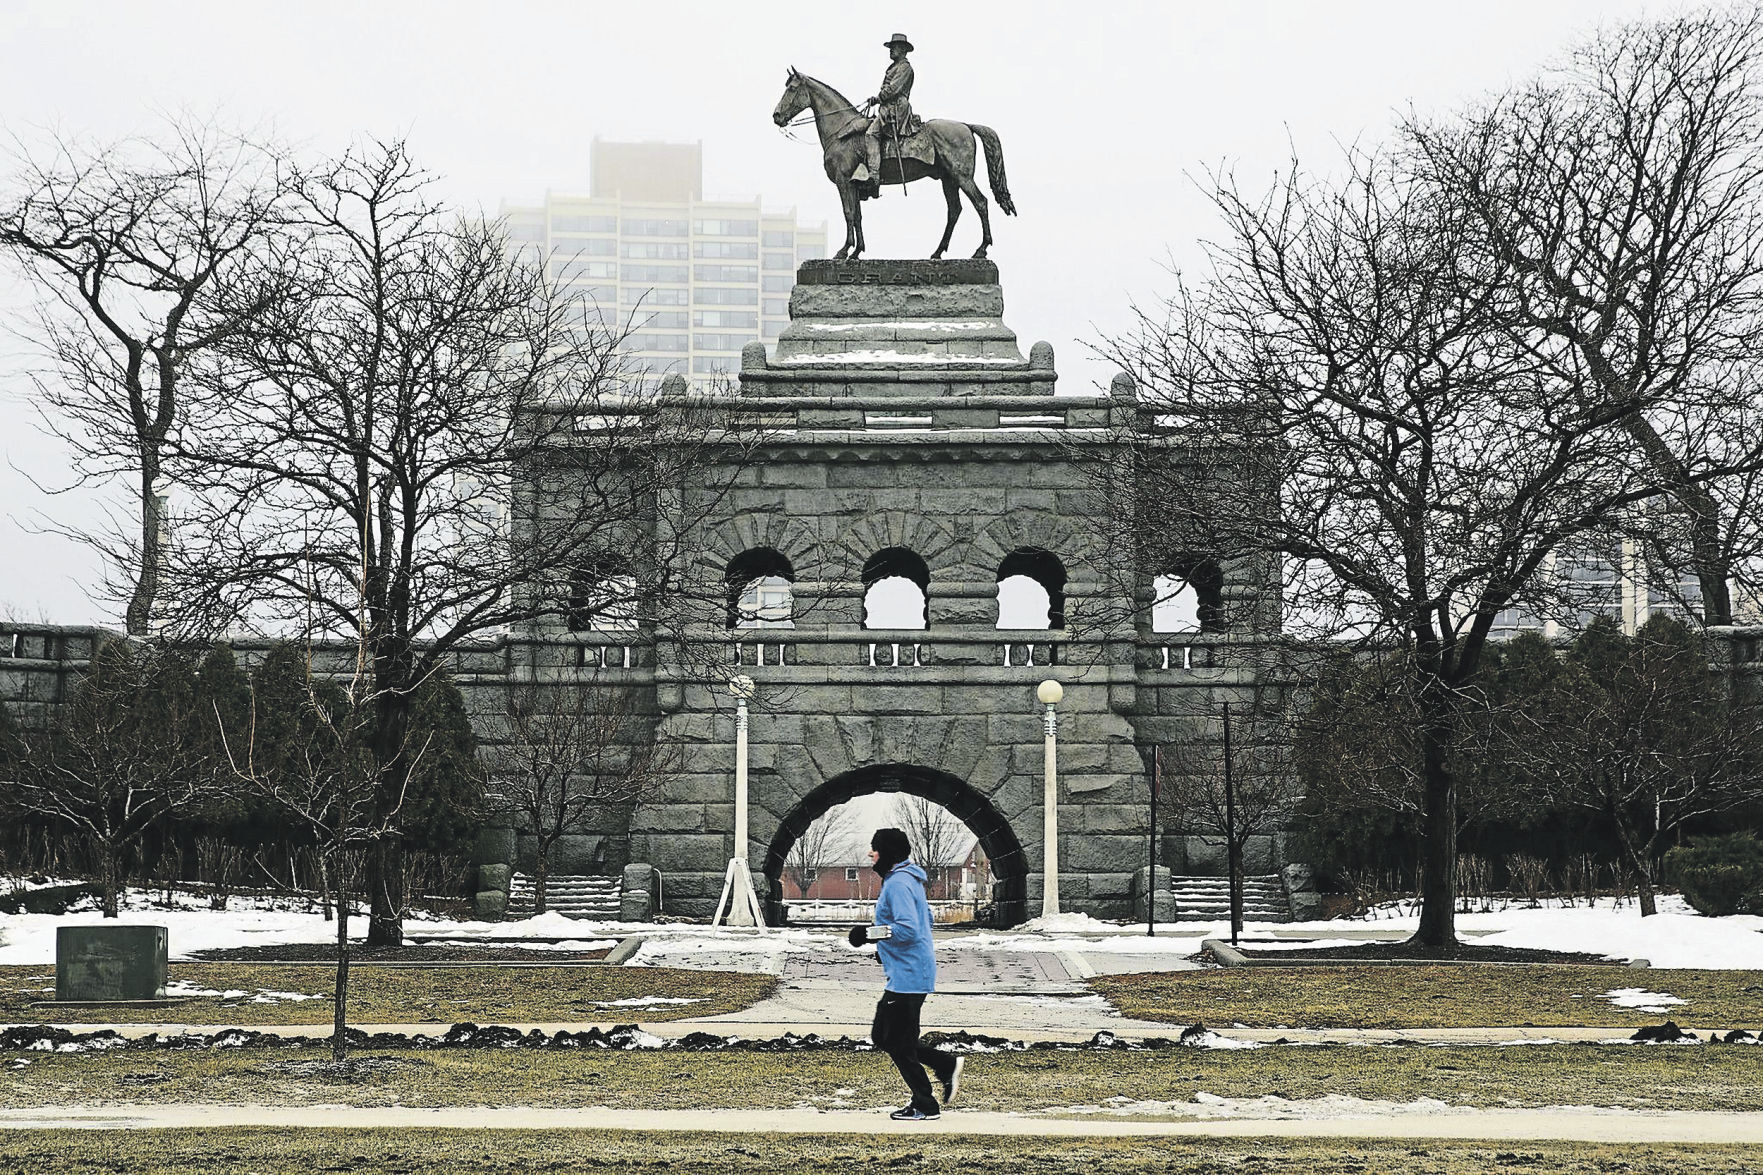 A jogger runs by the Ulysses S. Grant Monument south of Lincoln Park Zoo in Chicago on a cold and foggy morning in 2018.    PHOTO CREDIT: Jose M. Osorio